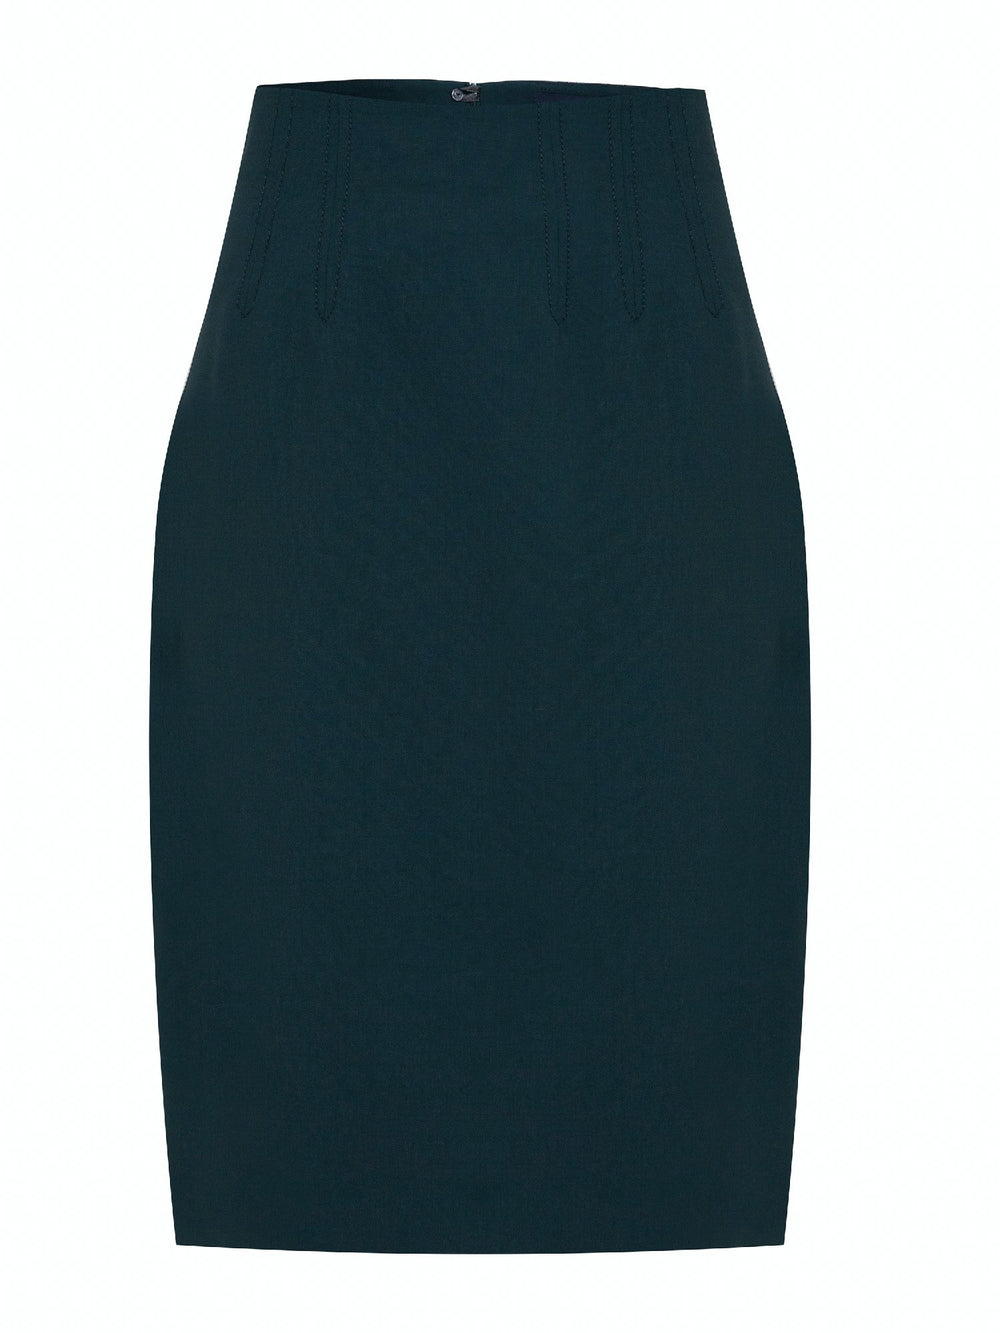 Classic officewear short pencil skirt in solid emerald wool with a hint of stretch for added comfort.